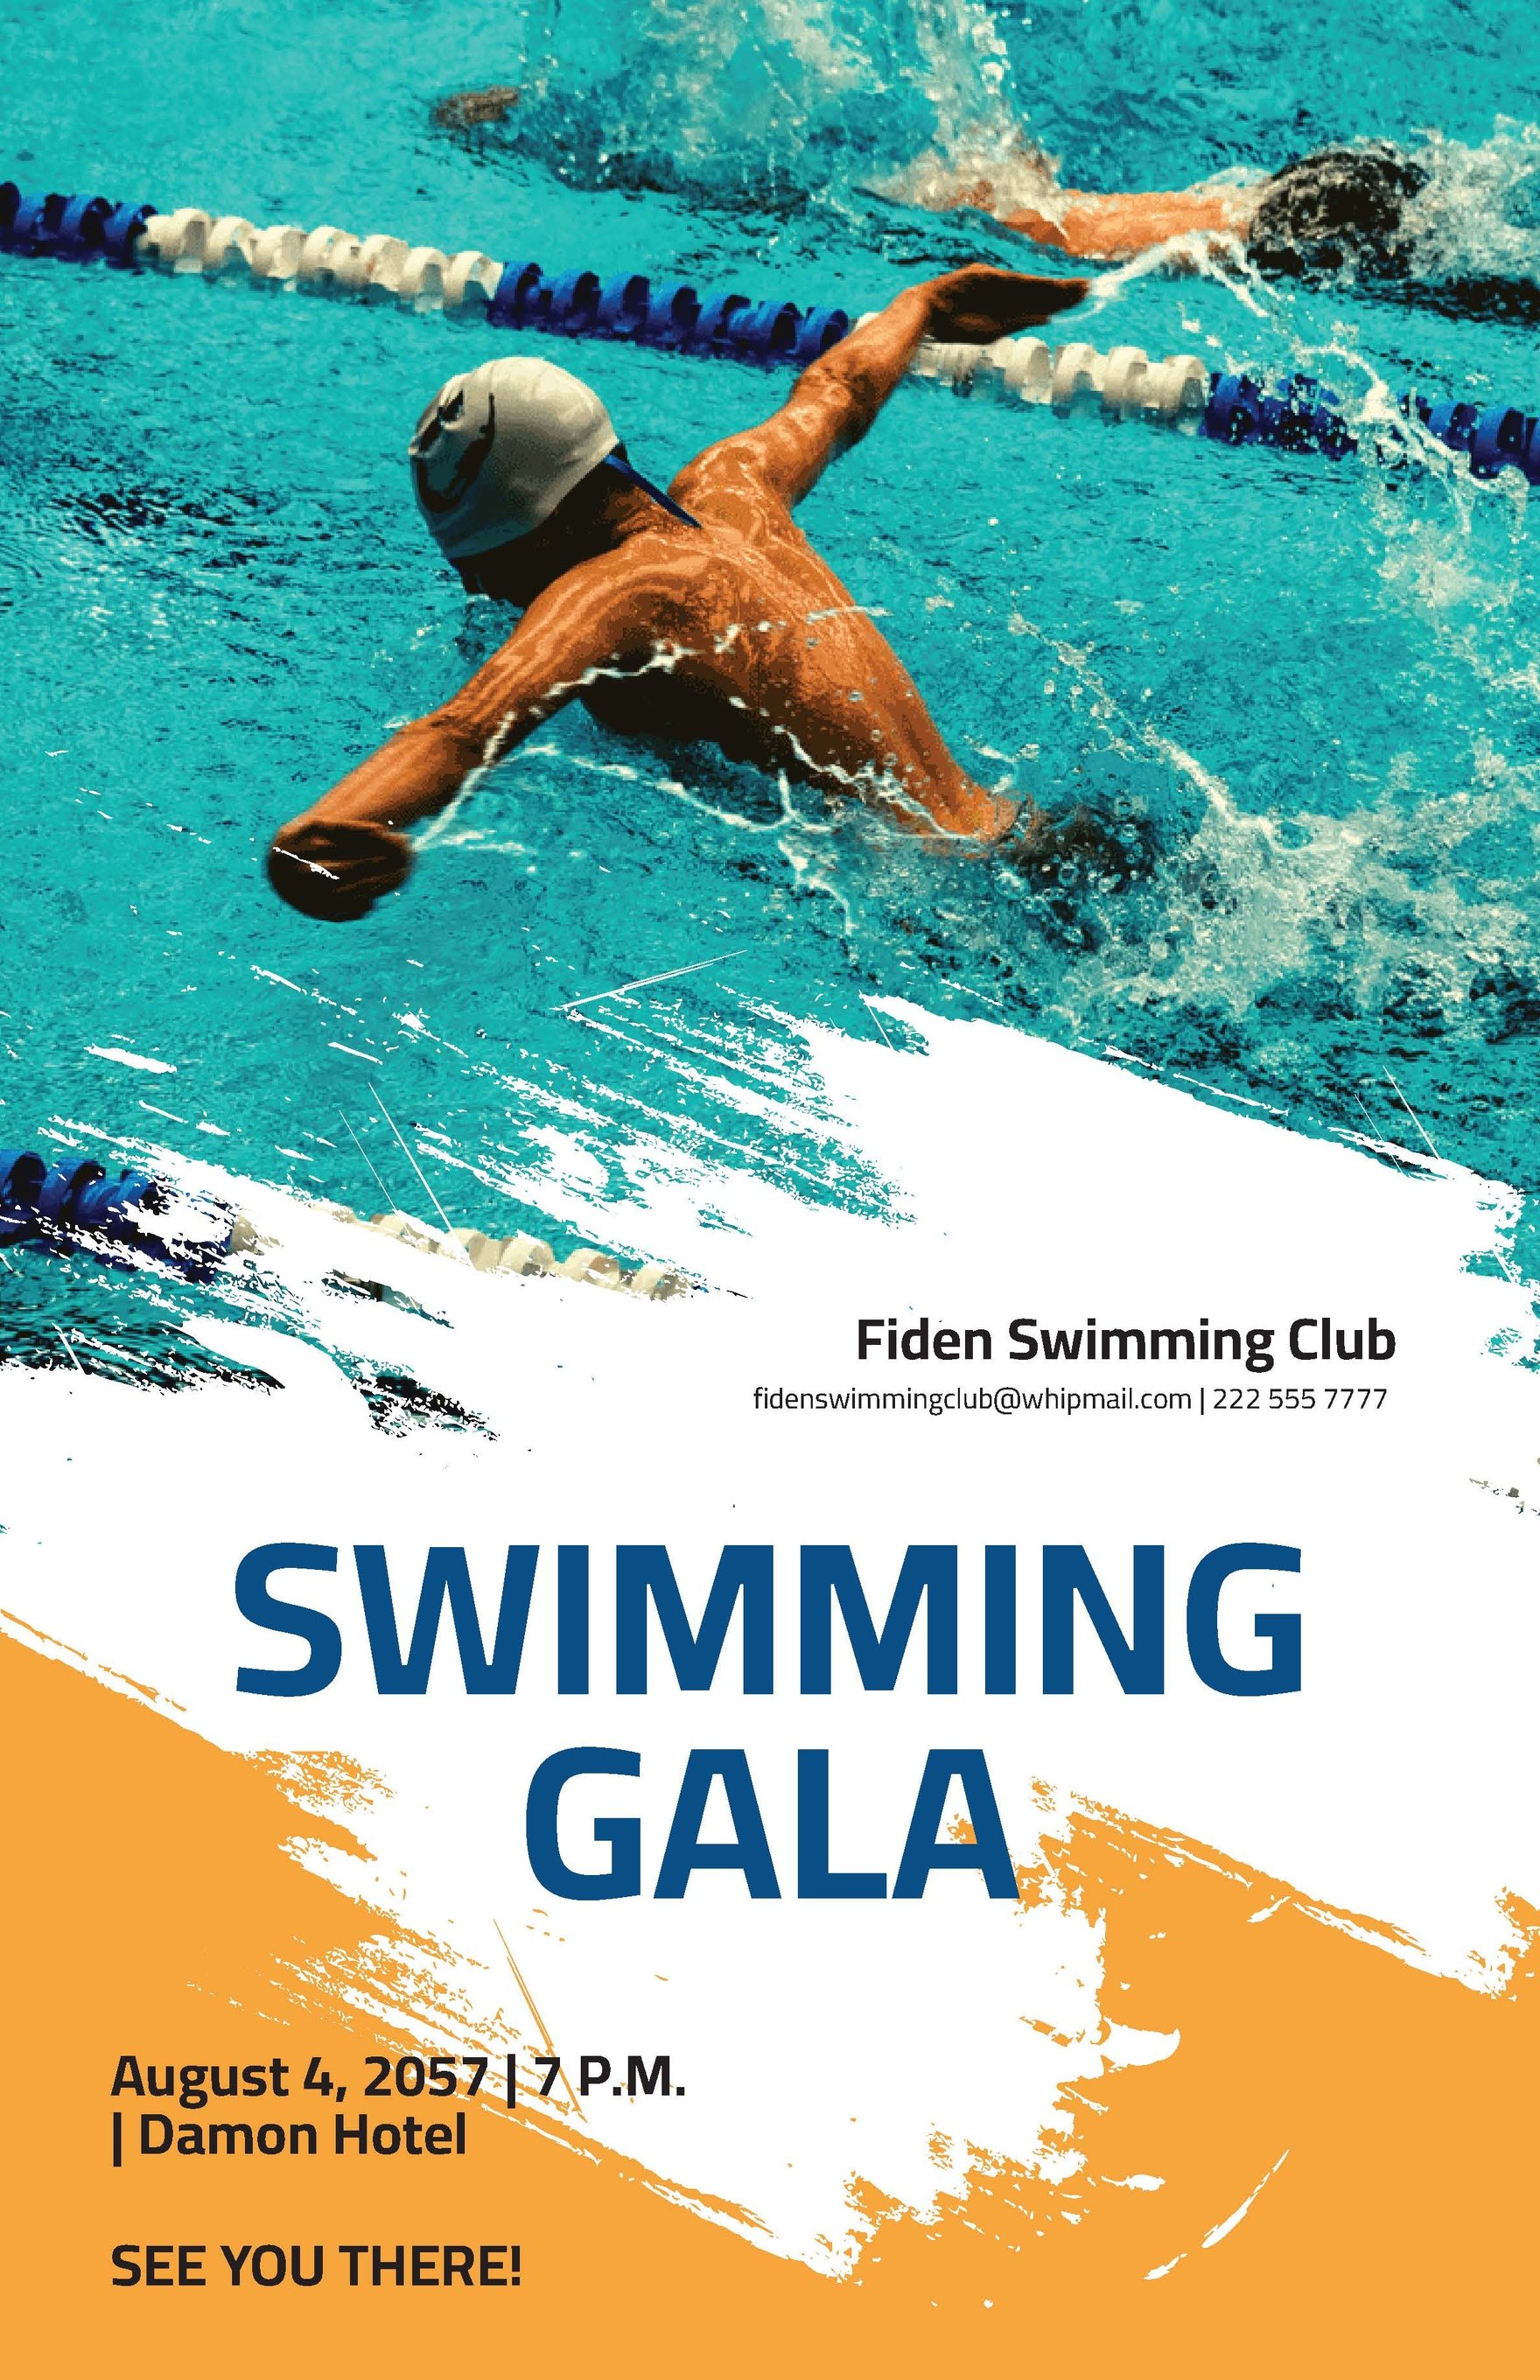 Free Swimming Gala Poster Template Download in Word, Google Docs